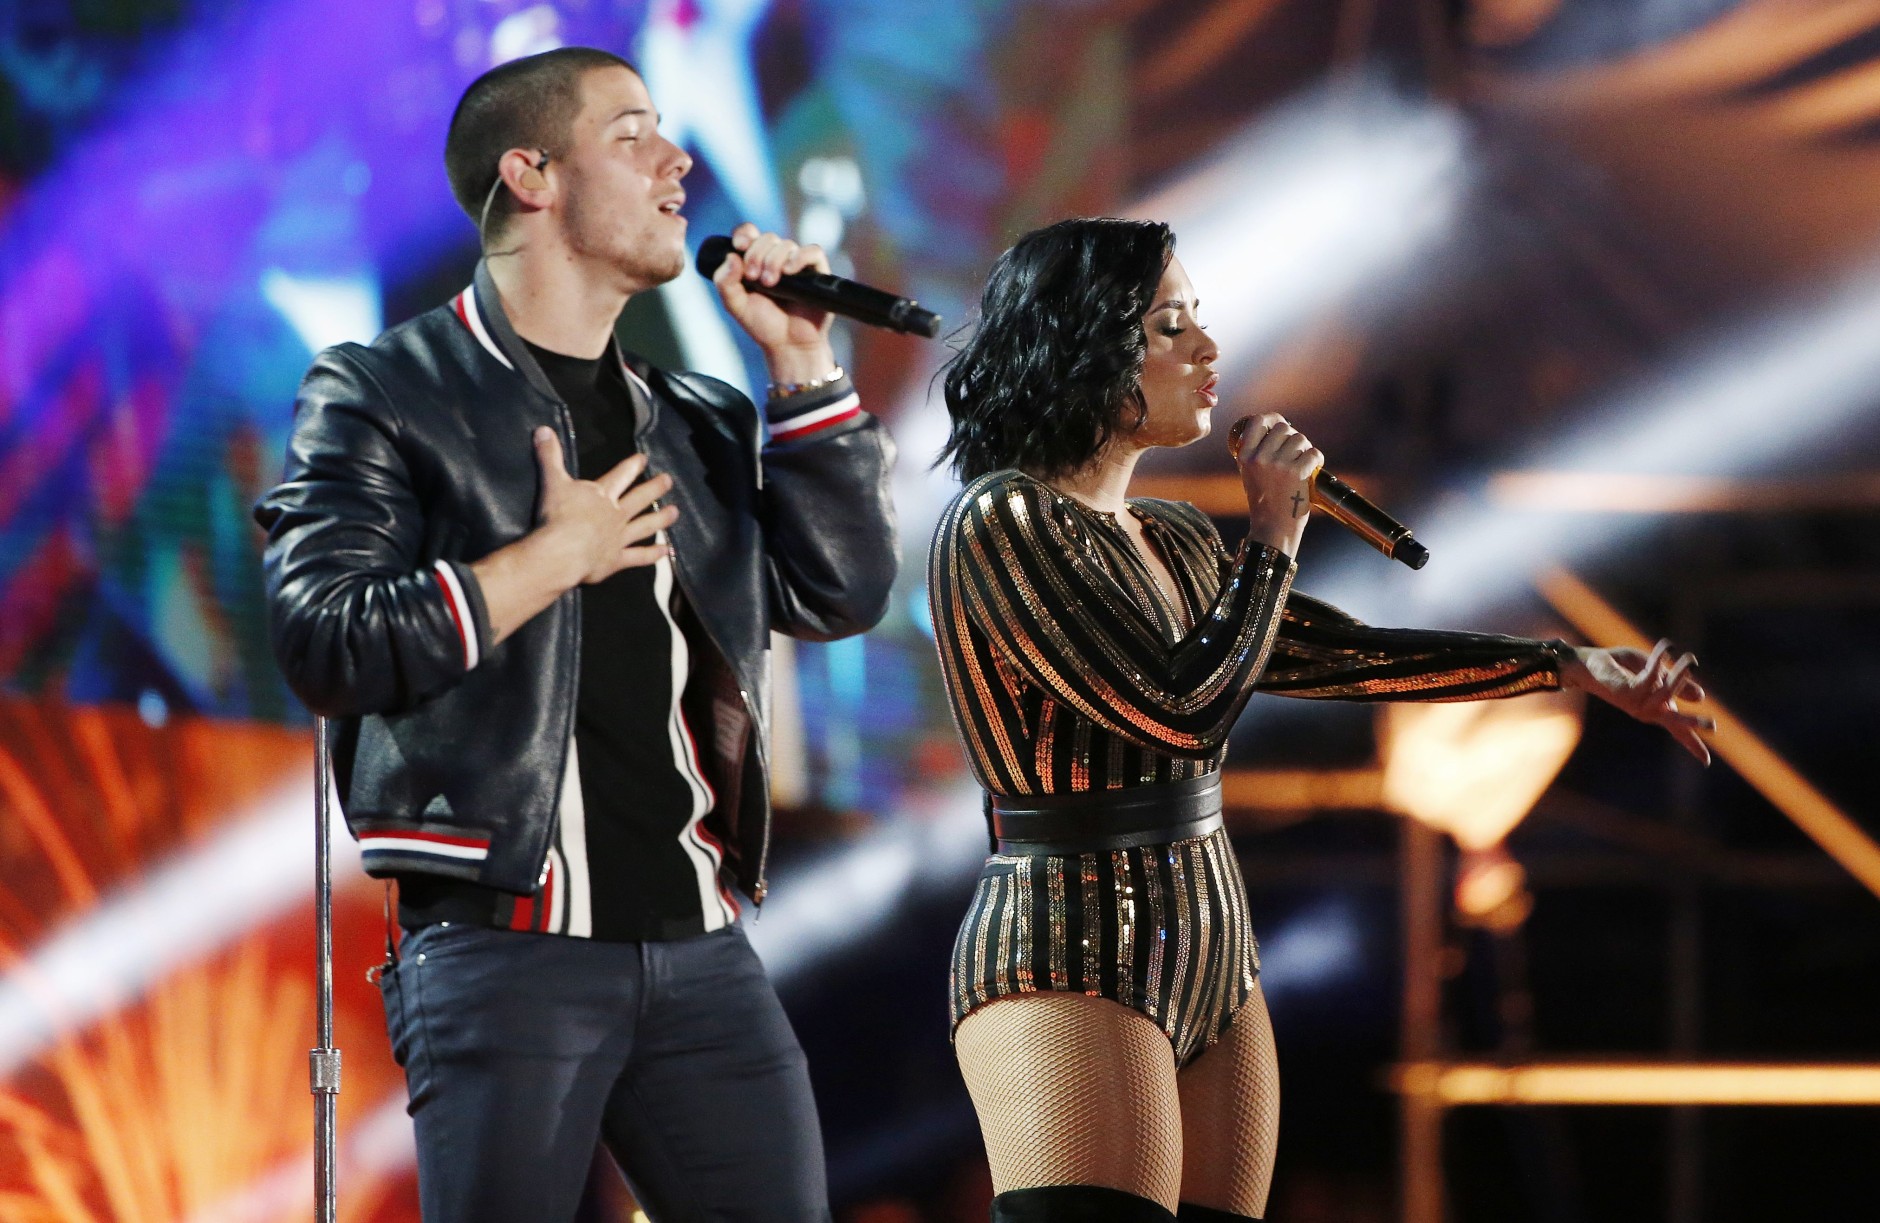 Nick Jonas and Demi Lovato perform during rehearsal for the annual Boston Pops Fireworks Spectacular on the Esplanade in Boston, Sunday, July 3, 2016. (AP Photo/Michael Dwyer)